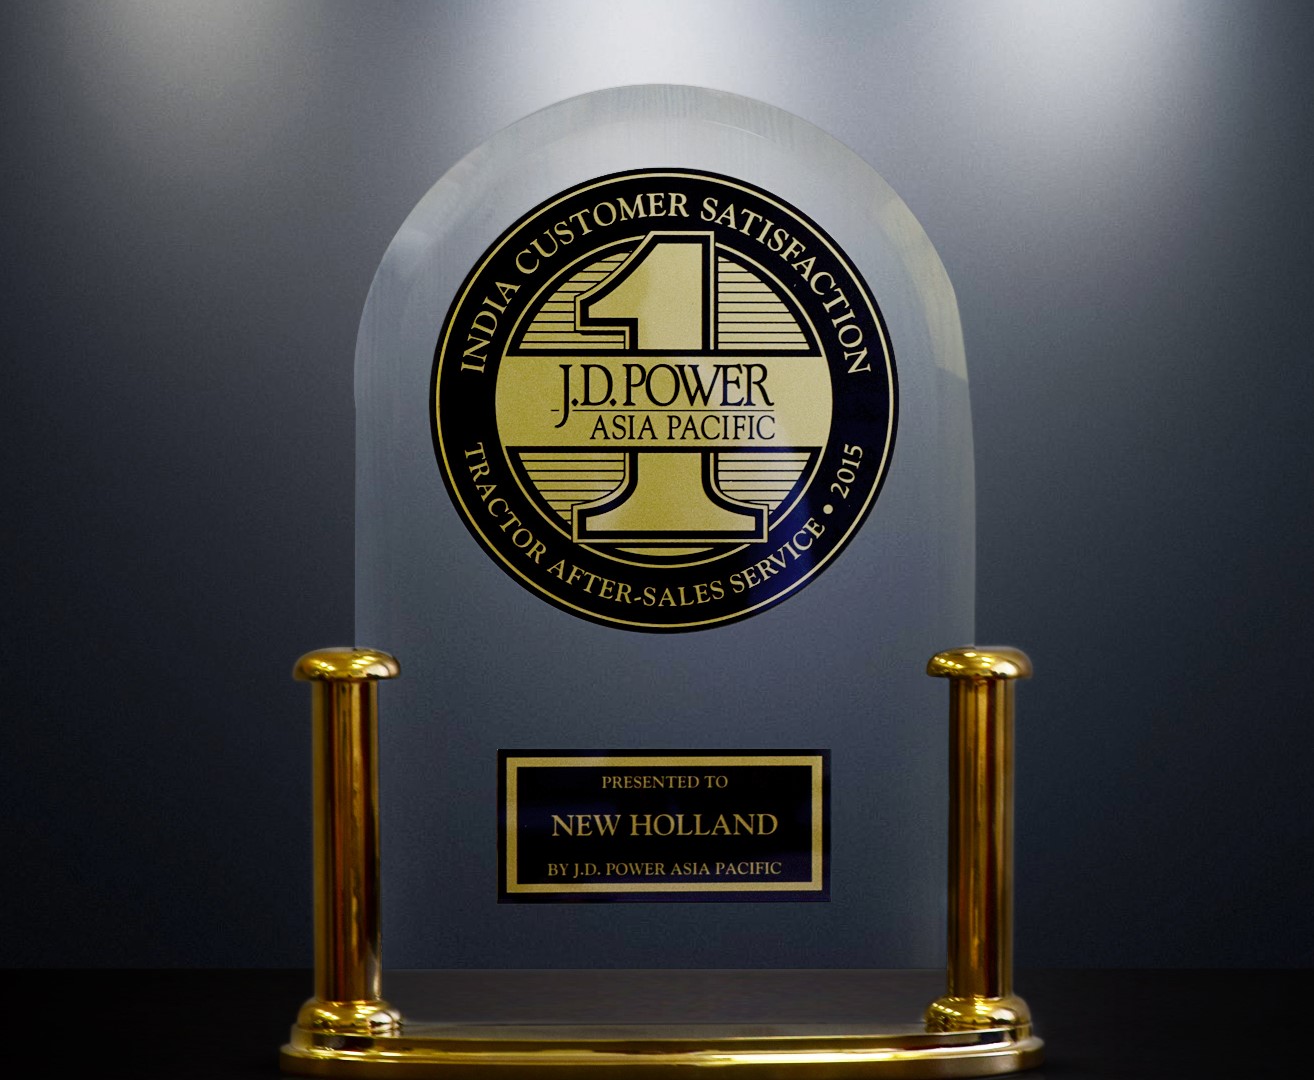 New Holland receives the Award for the highest ranking in Customer Service among tractor brands